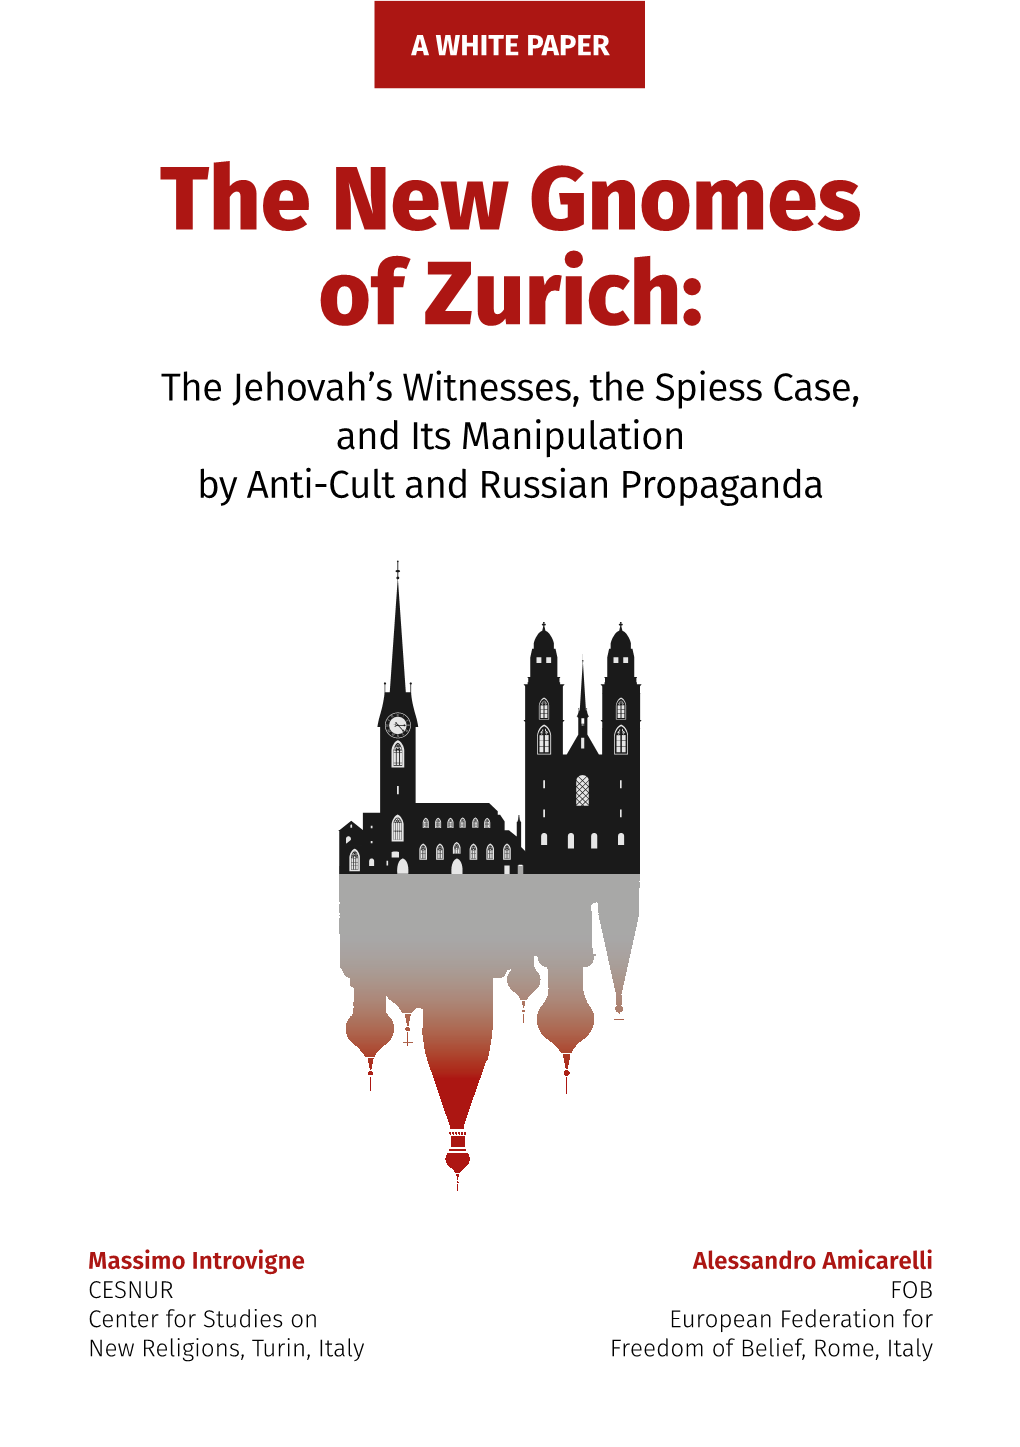 The New Gnomes of Zurich: the Jehovah’S Witnesses, the Spiess Case, and Its Manipulation by Anti-Cult and Russian Propaganda